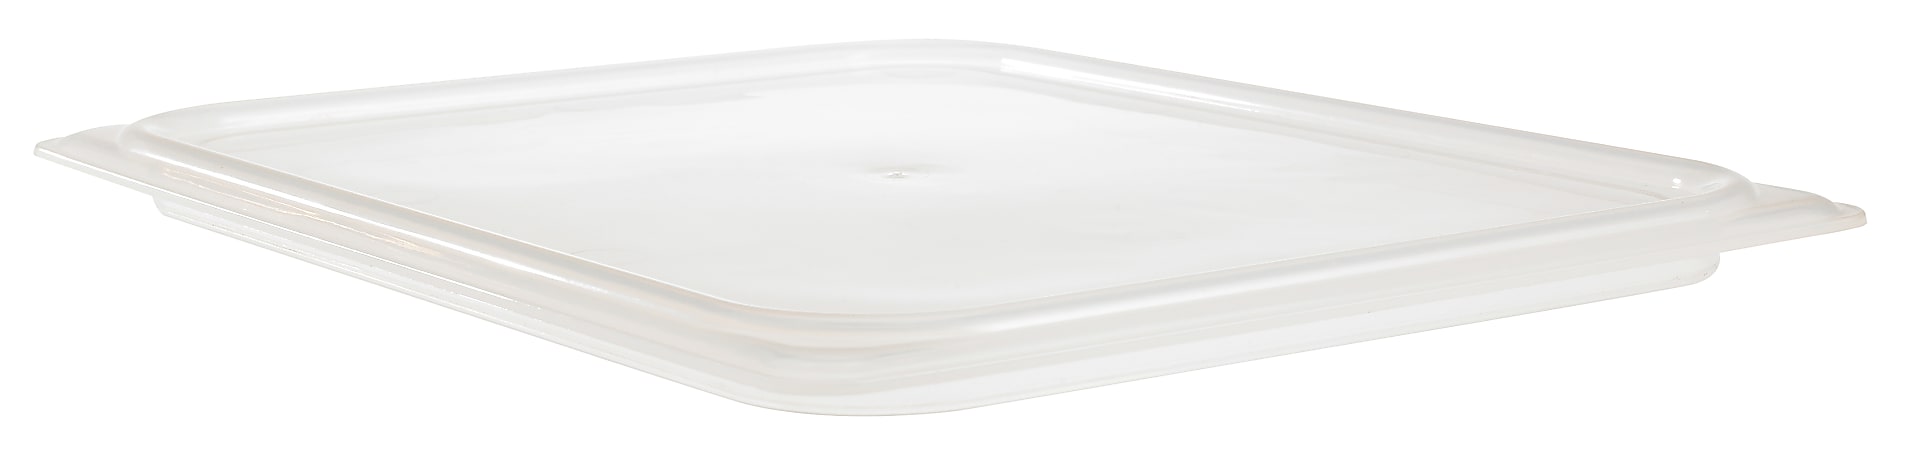 Cambro Translucent GN 1/2 Seal Covers For Food Pans, 3/4"H x 12-11/16"W x 10-5/16"D, Pack Of 6 Covers